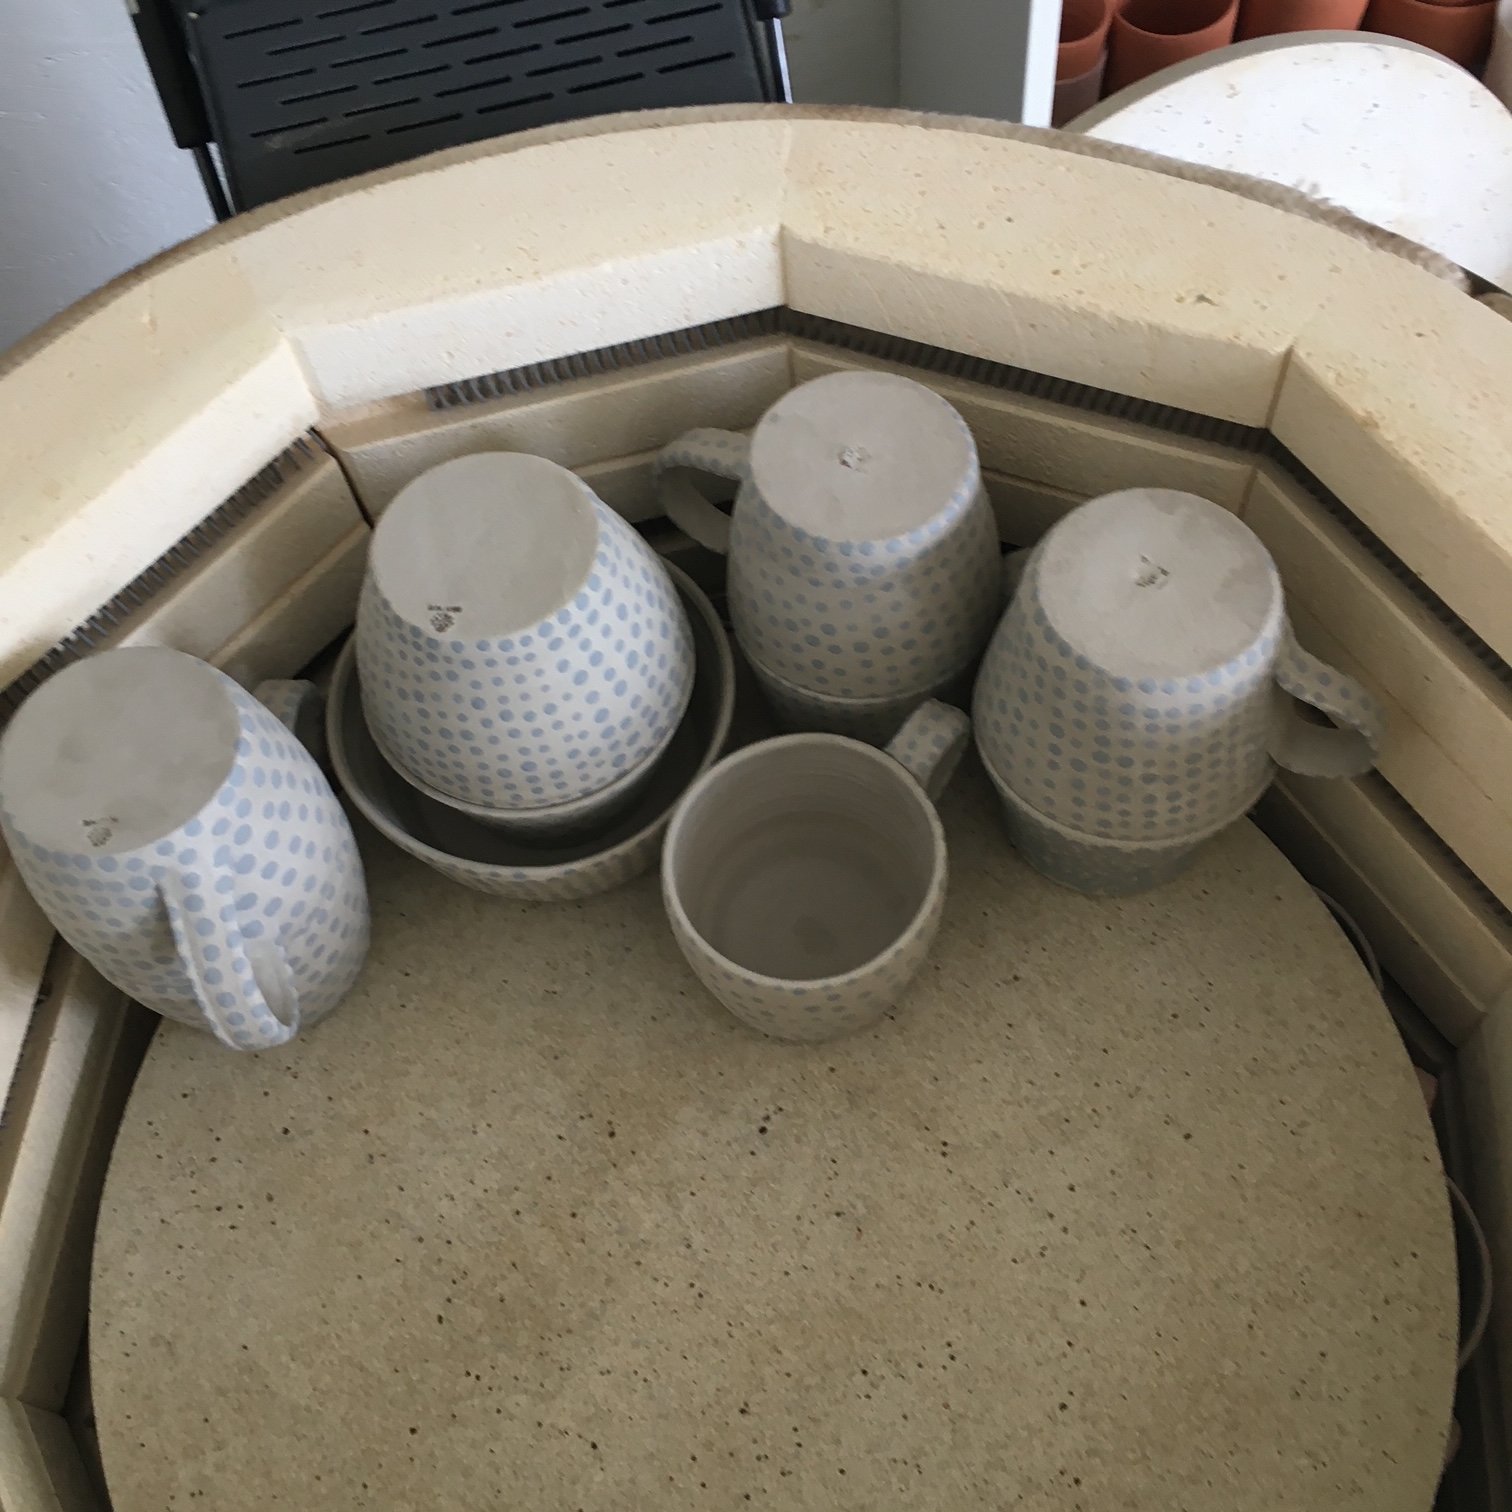 Things I check for before bisque firing, and how I fix them 